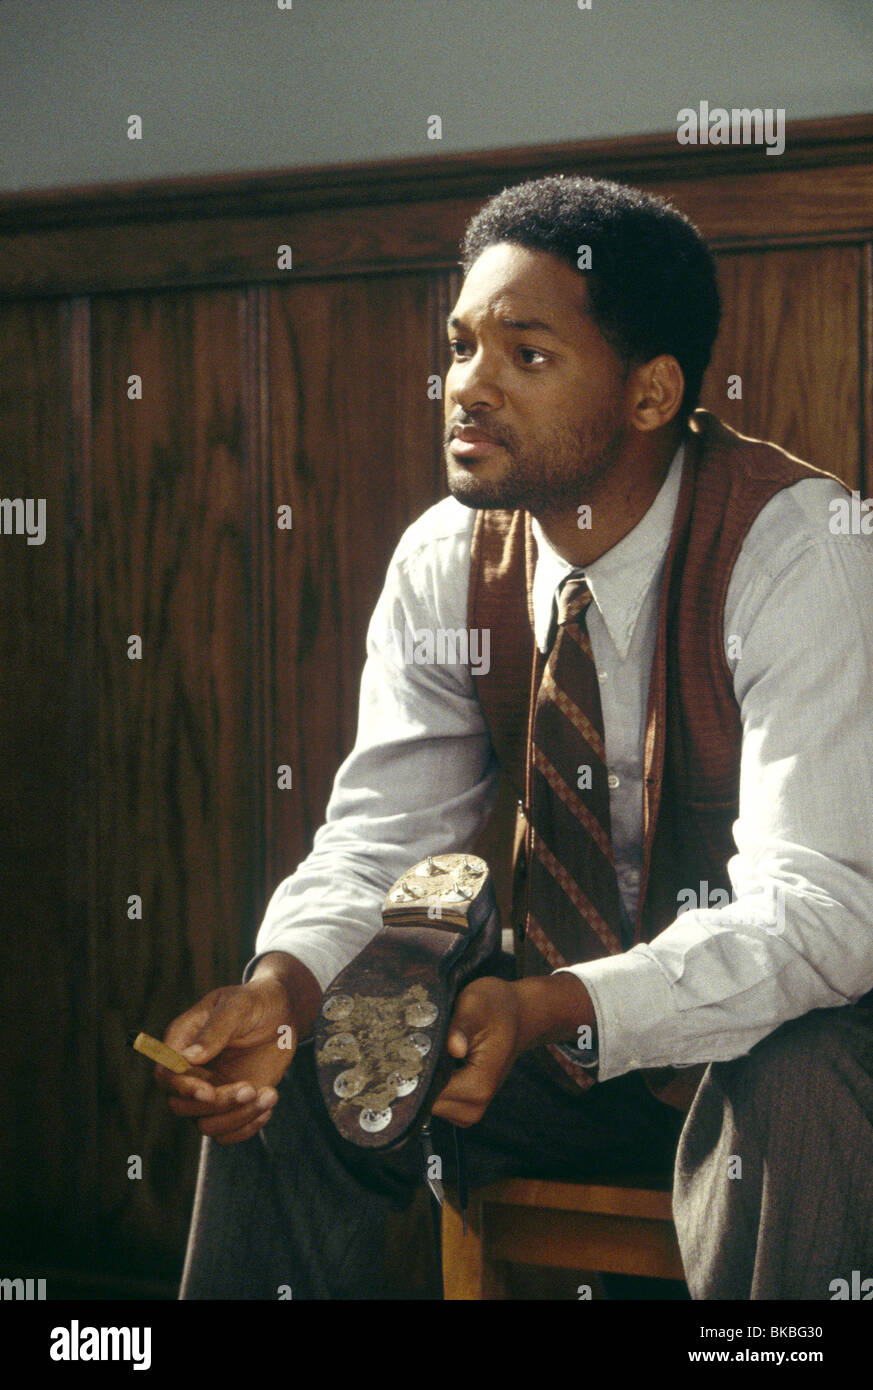 THE LEGEND OF BAGGER VANCE (2000) WILL SMITH BAGG 001 8030 Stock Photo